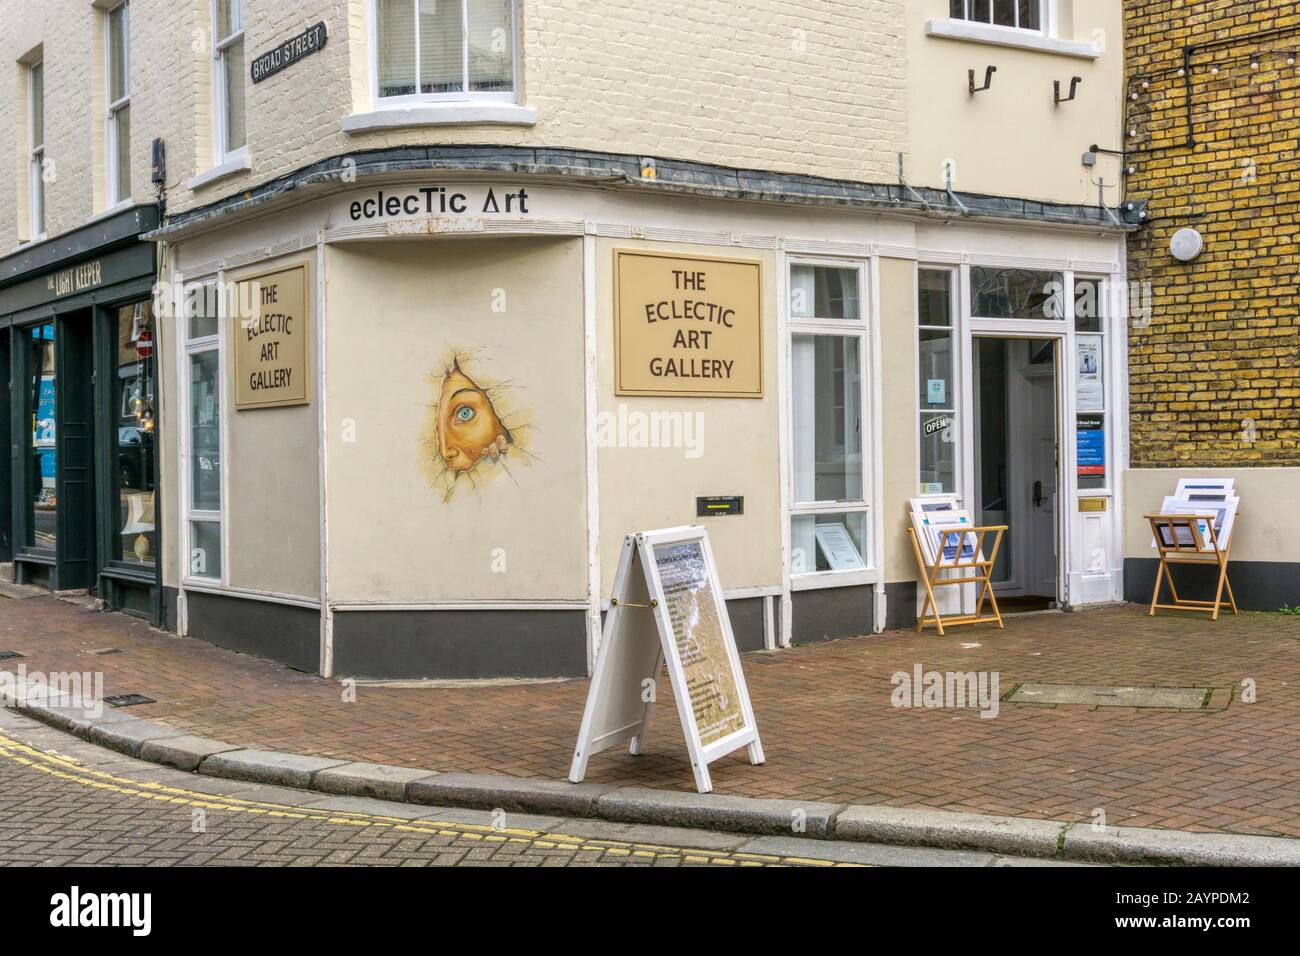 The eclecTic Art Gallery in Margate old town. Stock Photo